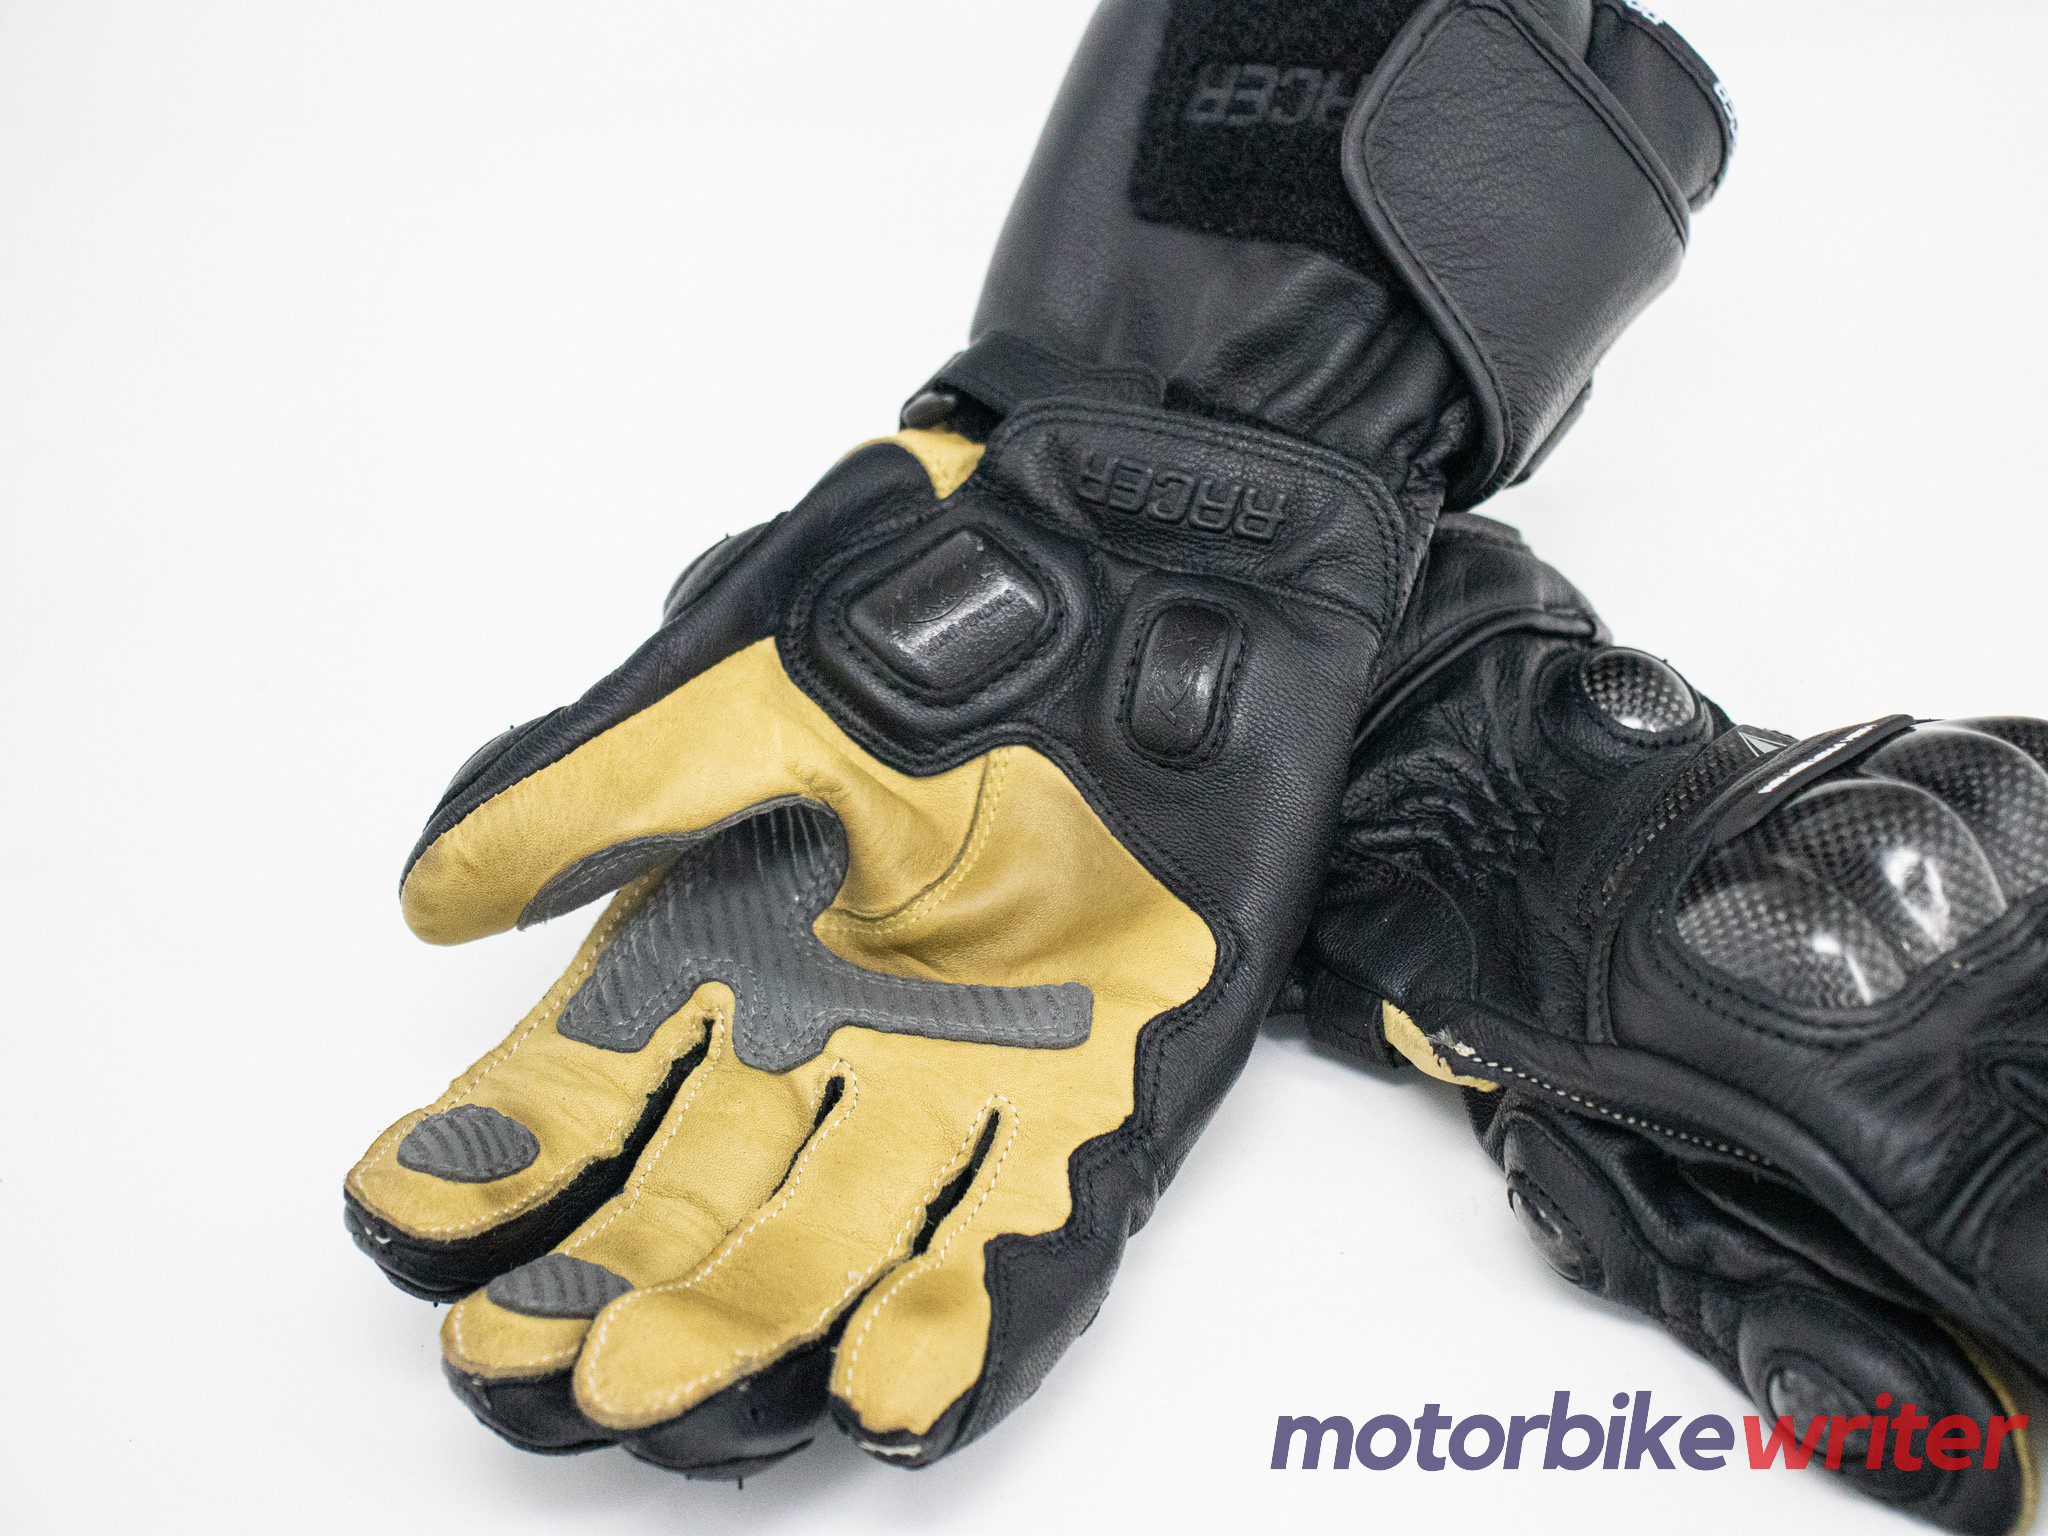 Both sides of the High Racer glove